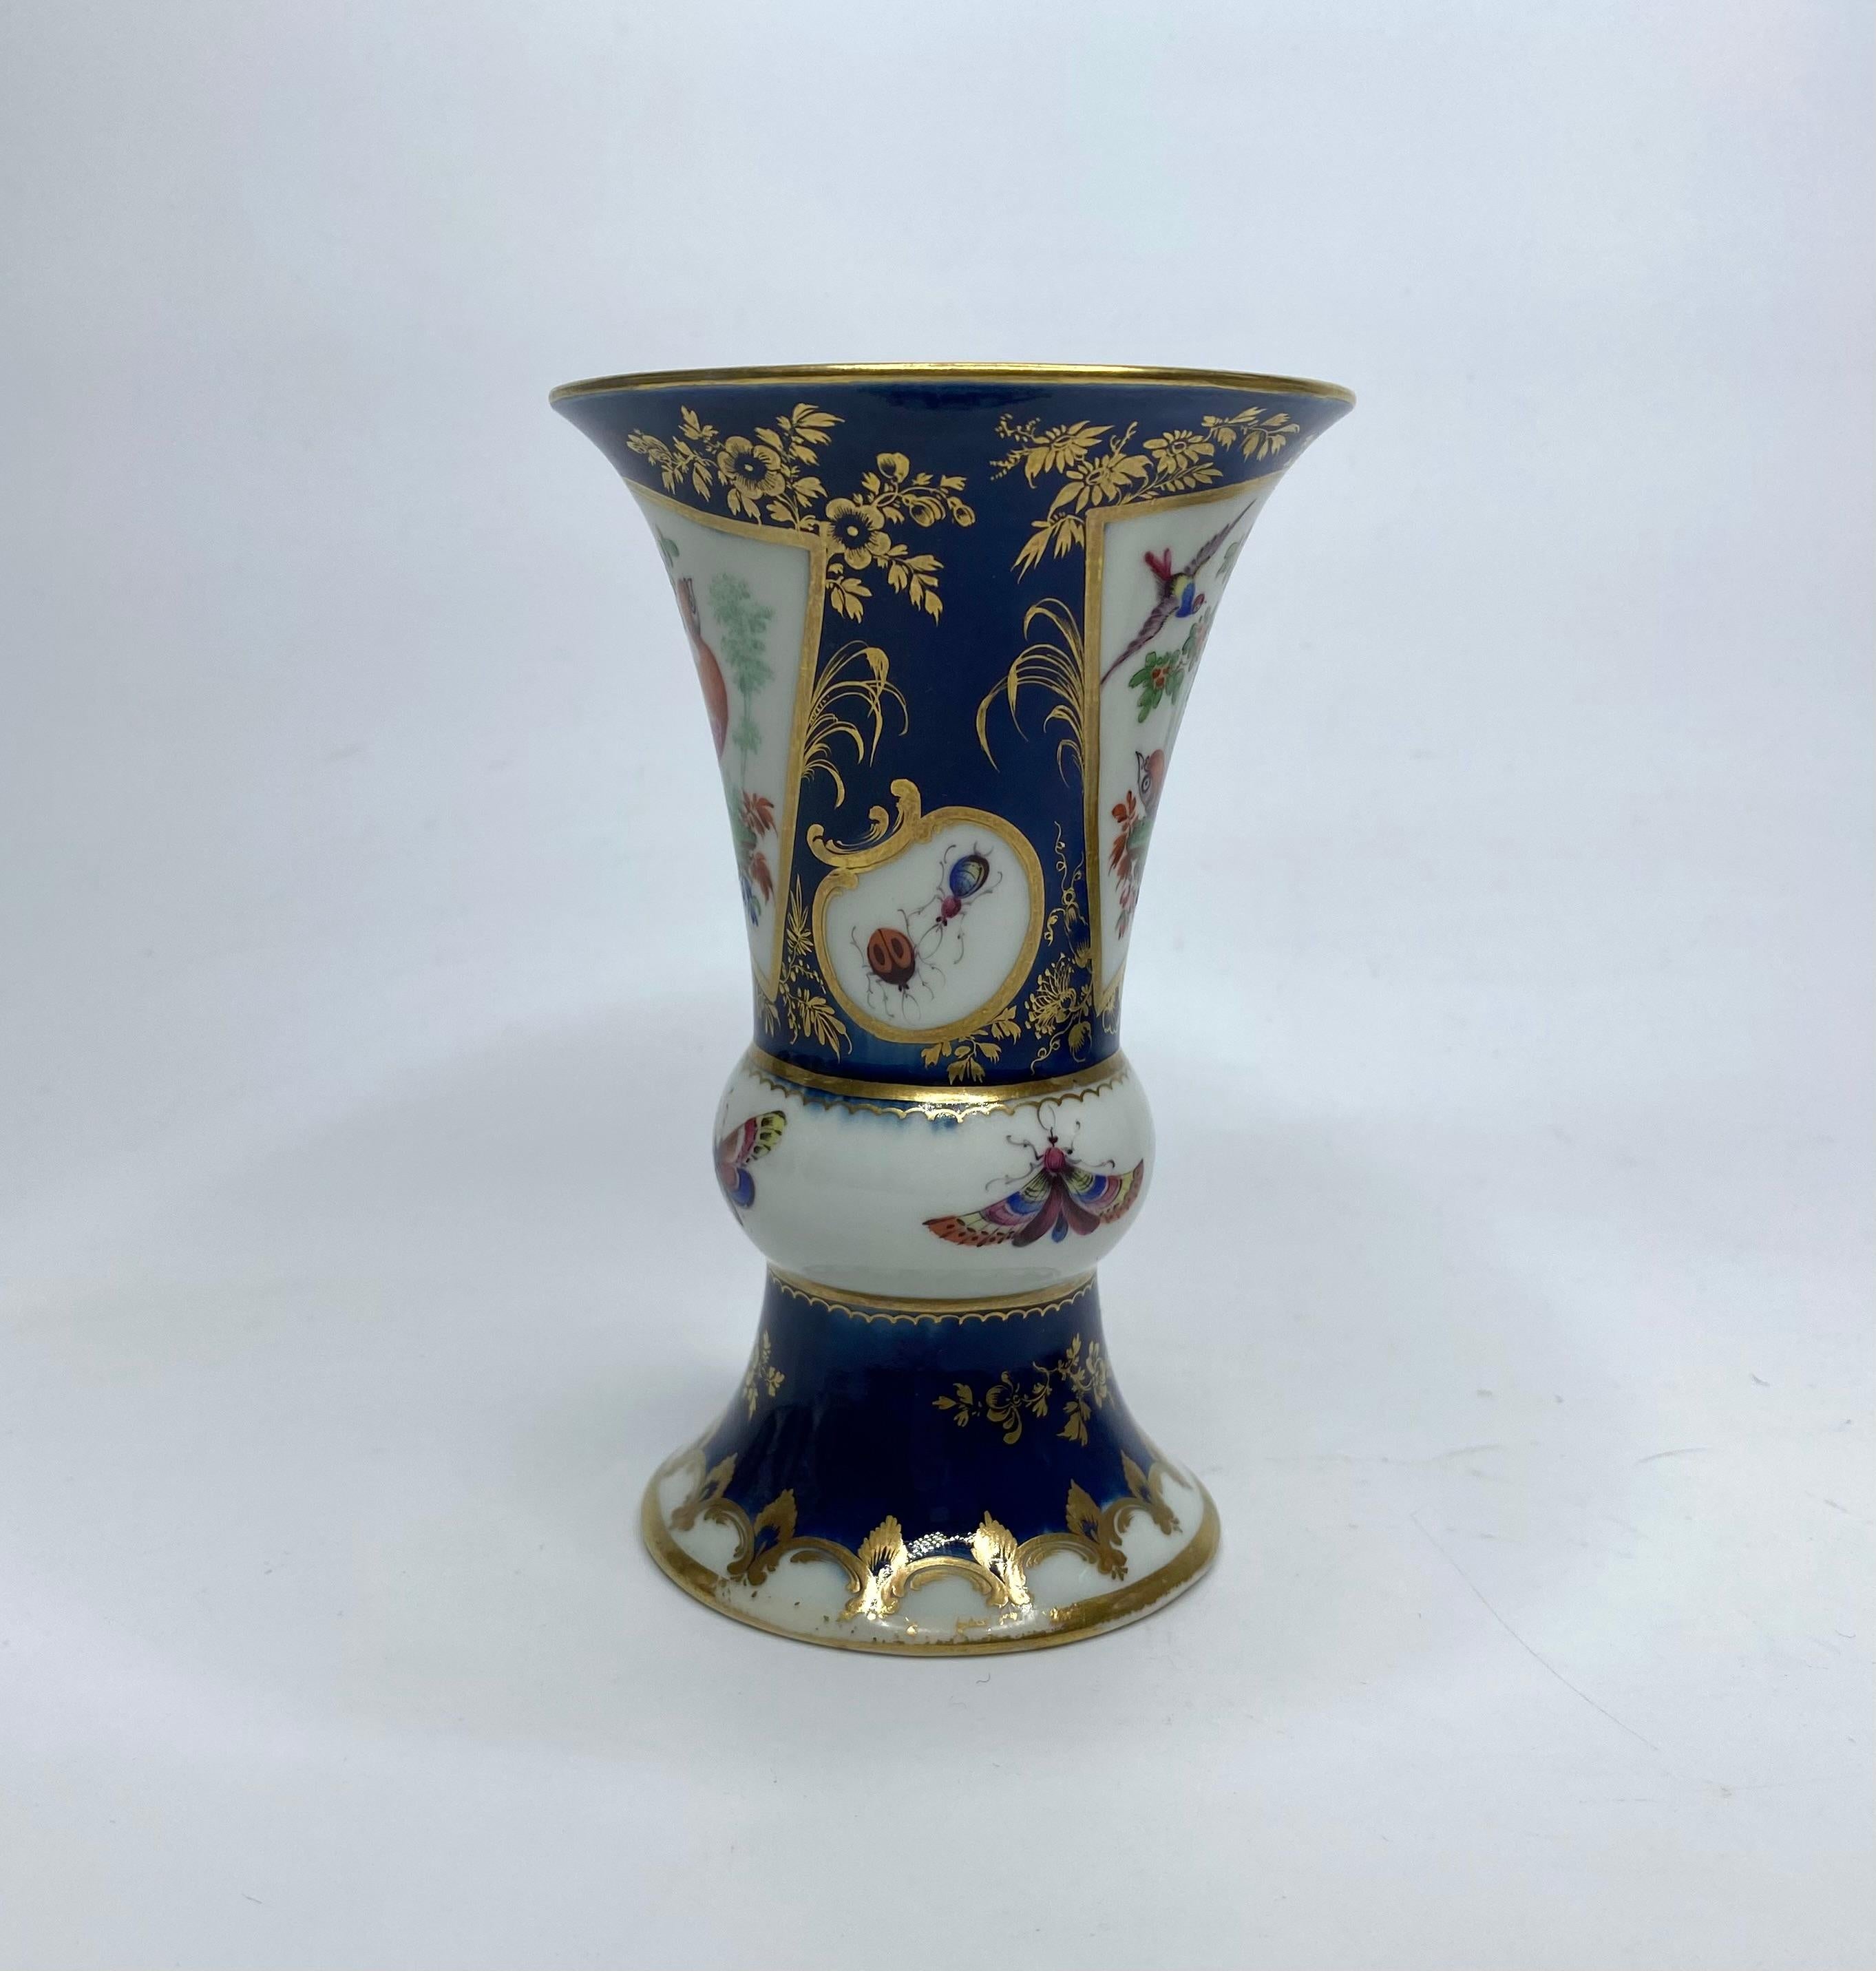 First Period Worcester porcelain vase, c. 1770. The vase modelled after a Chinese ‘Gu’ shaped vase, and finely painted with fan shaped gilt panels of ‘Fancy Birds’, amongst trees. Divided by smaller panels containing moths and insects. All upon a